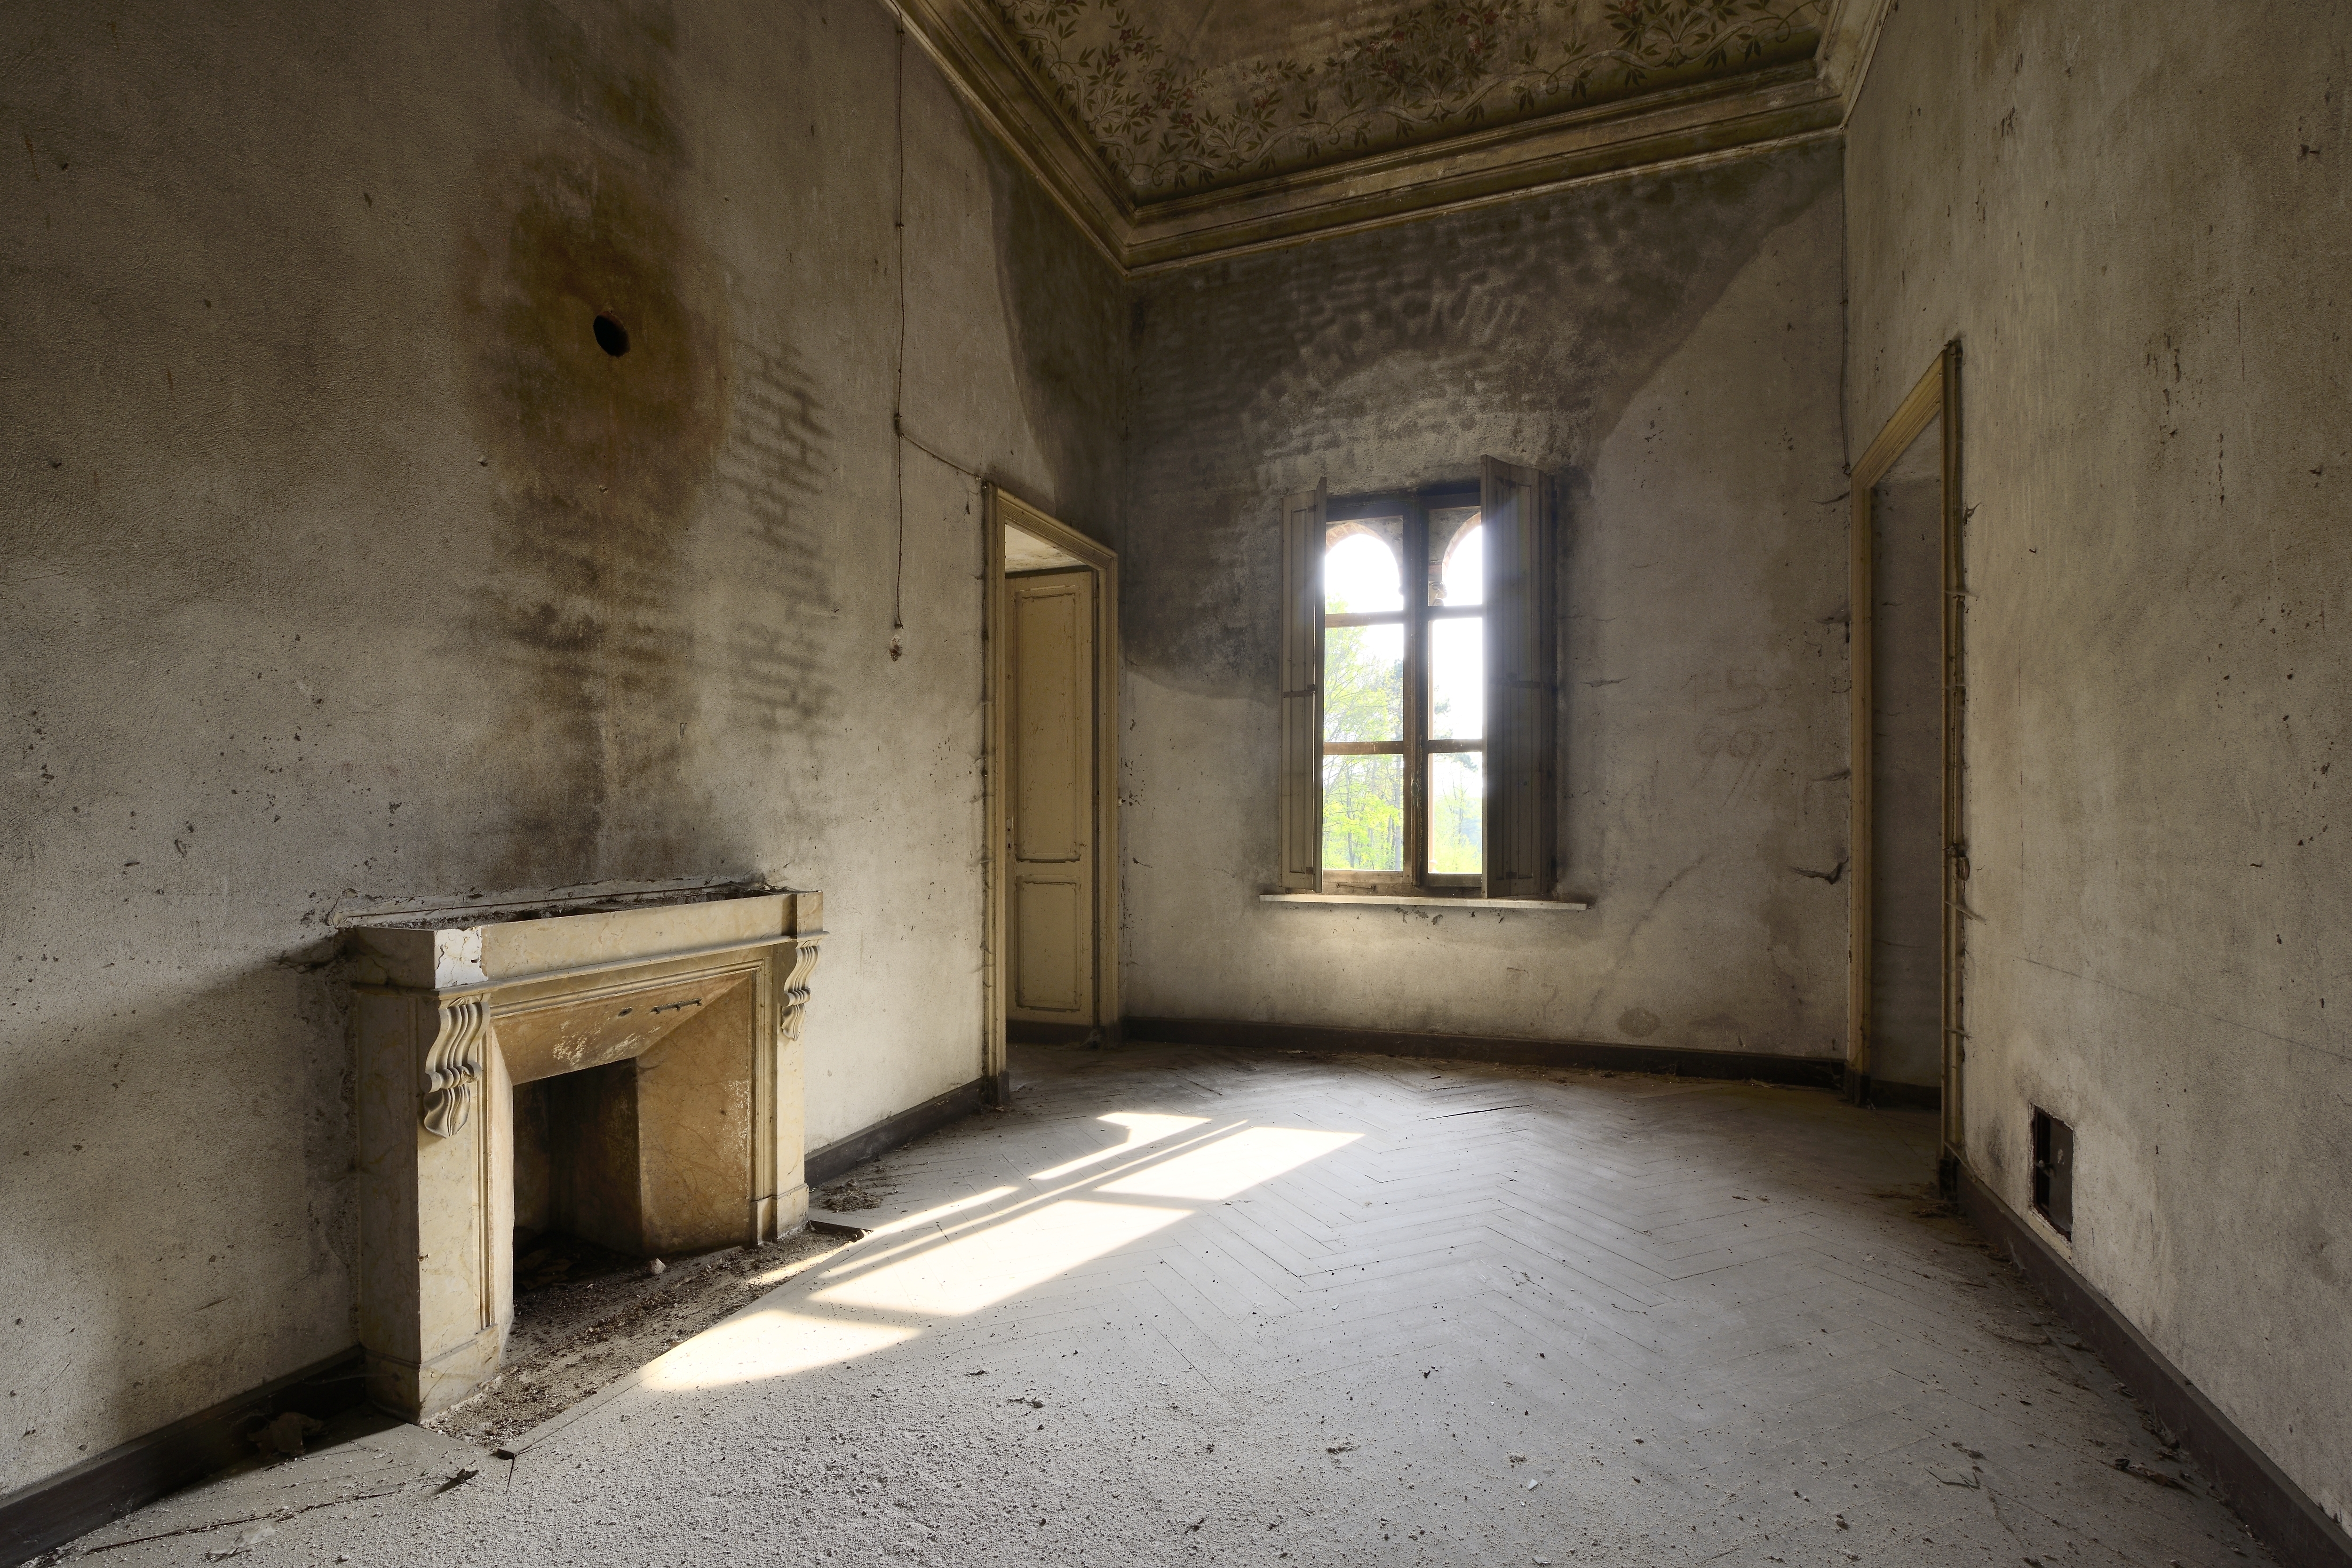 An old abandonded room with a fireplace | Source: Shutterstock